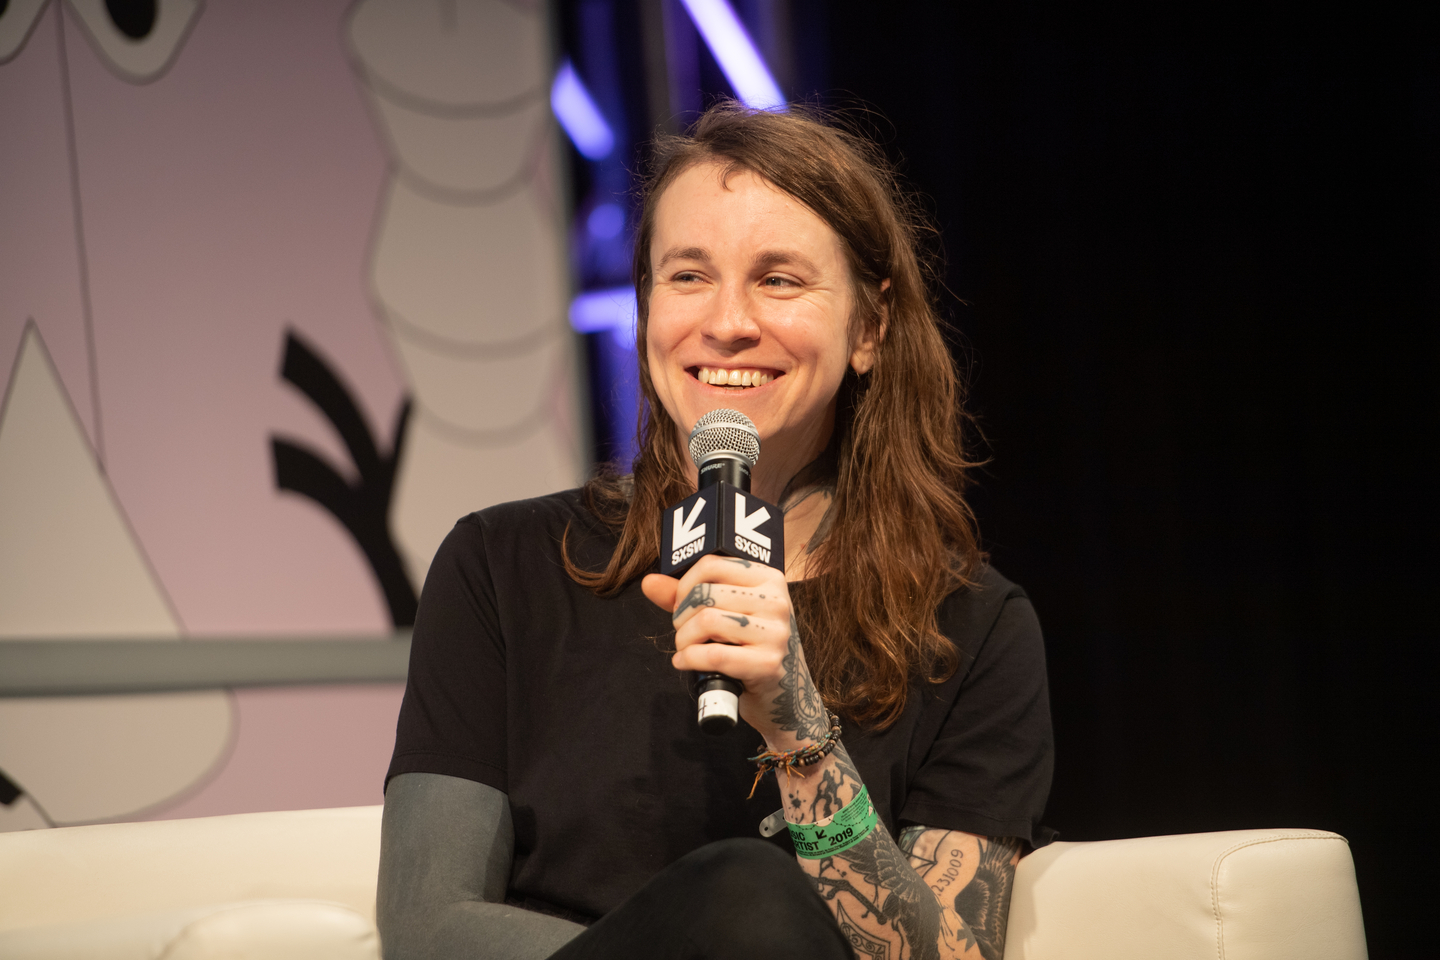 Laura Jane Grace at her Featured Session – Photo by Matt Winkelmeyer/Getty Images for SXSW